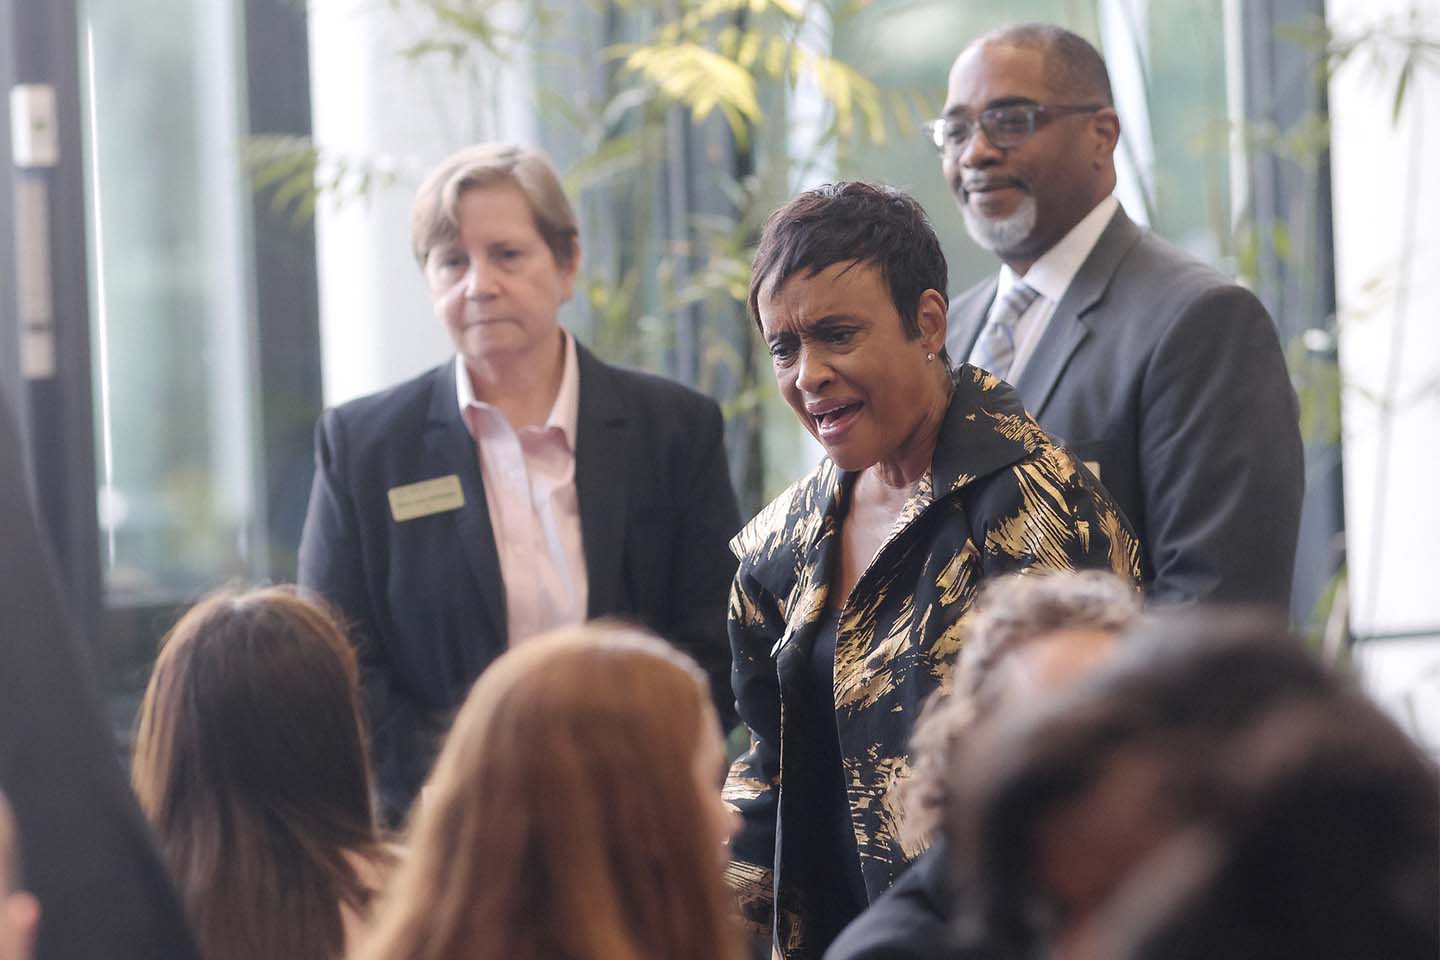 Judge Glenda Hatchett, Dean Mary Anne Bobinski, and Professionalism Director Derrick Howard mingling with Emory Law 1Ls at the Professionalism Day reception